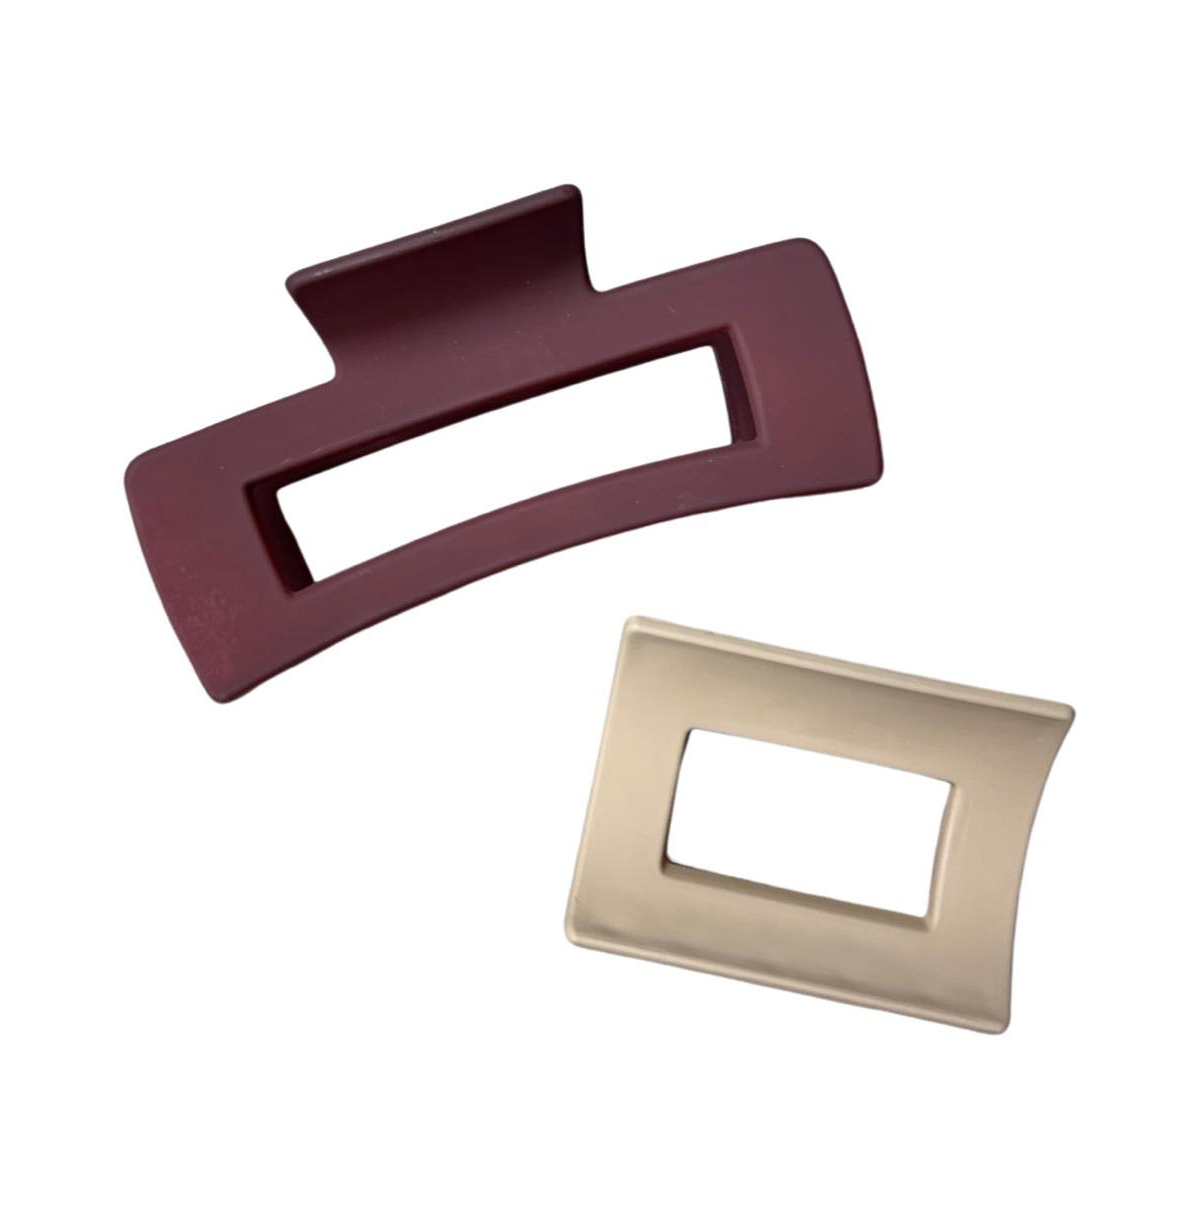 Headbands Of Hope Matte Claw Clip Set Of 2 - Maroon + Tan In Red